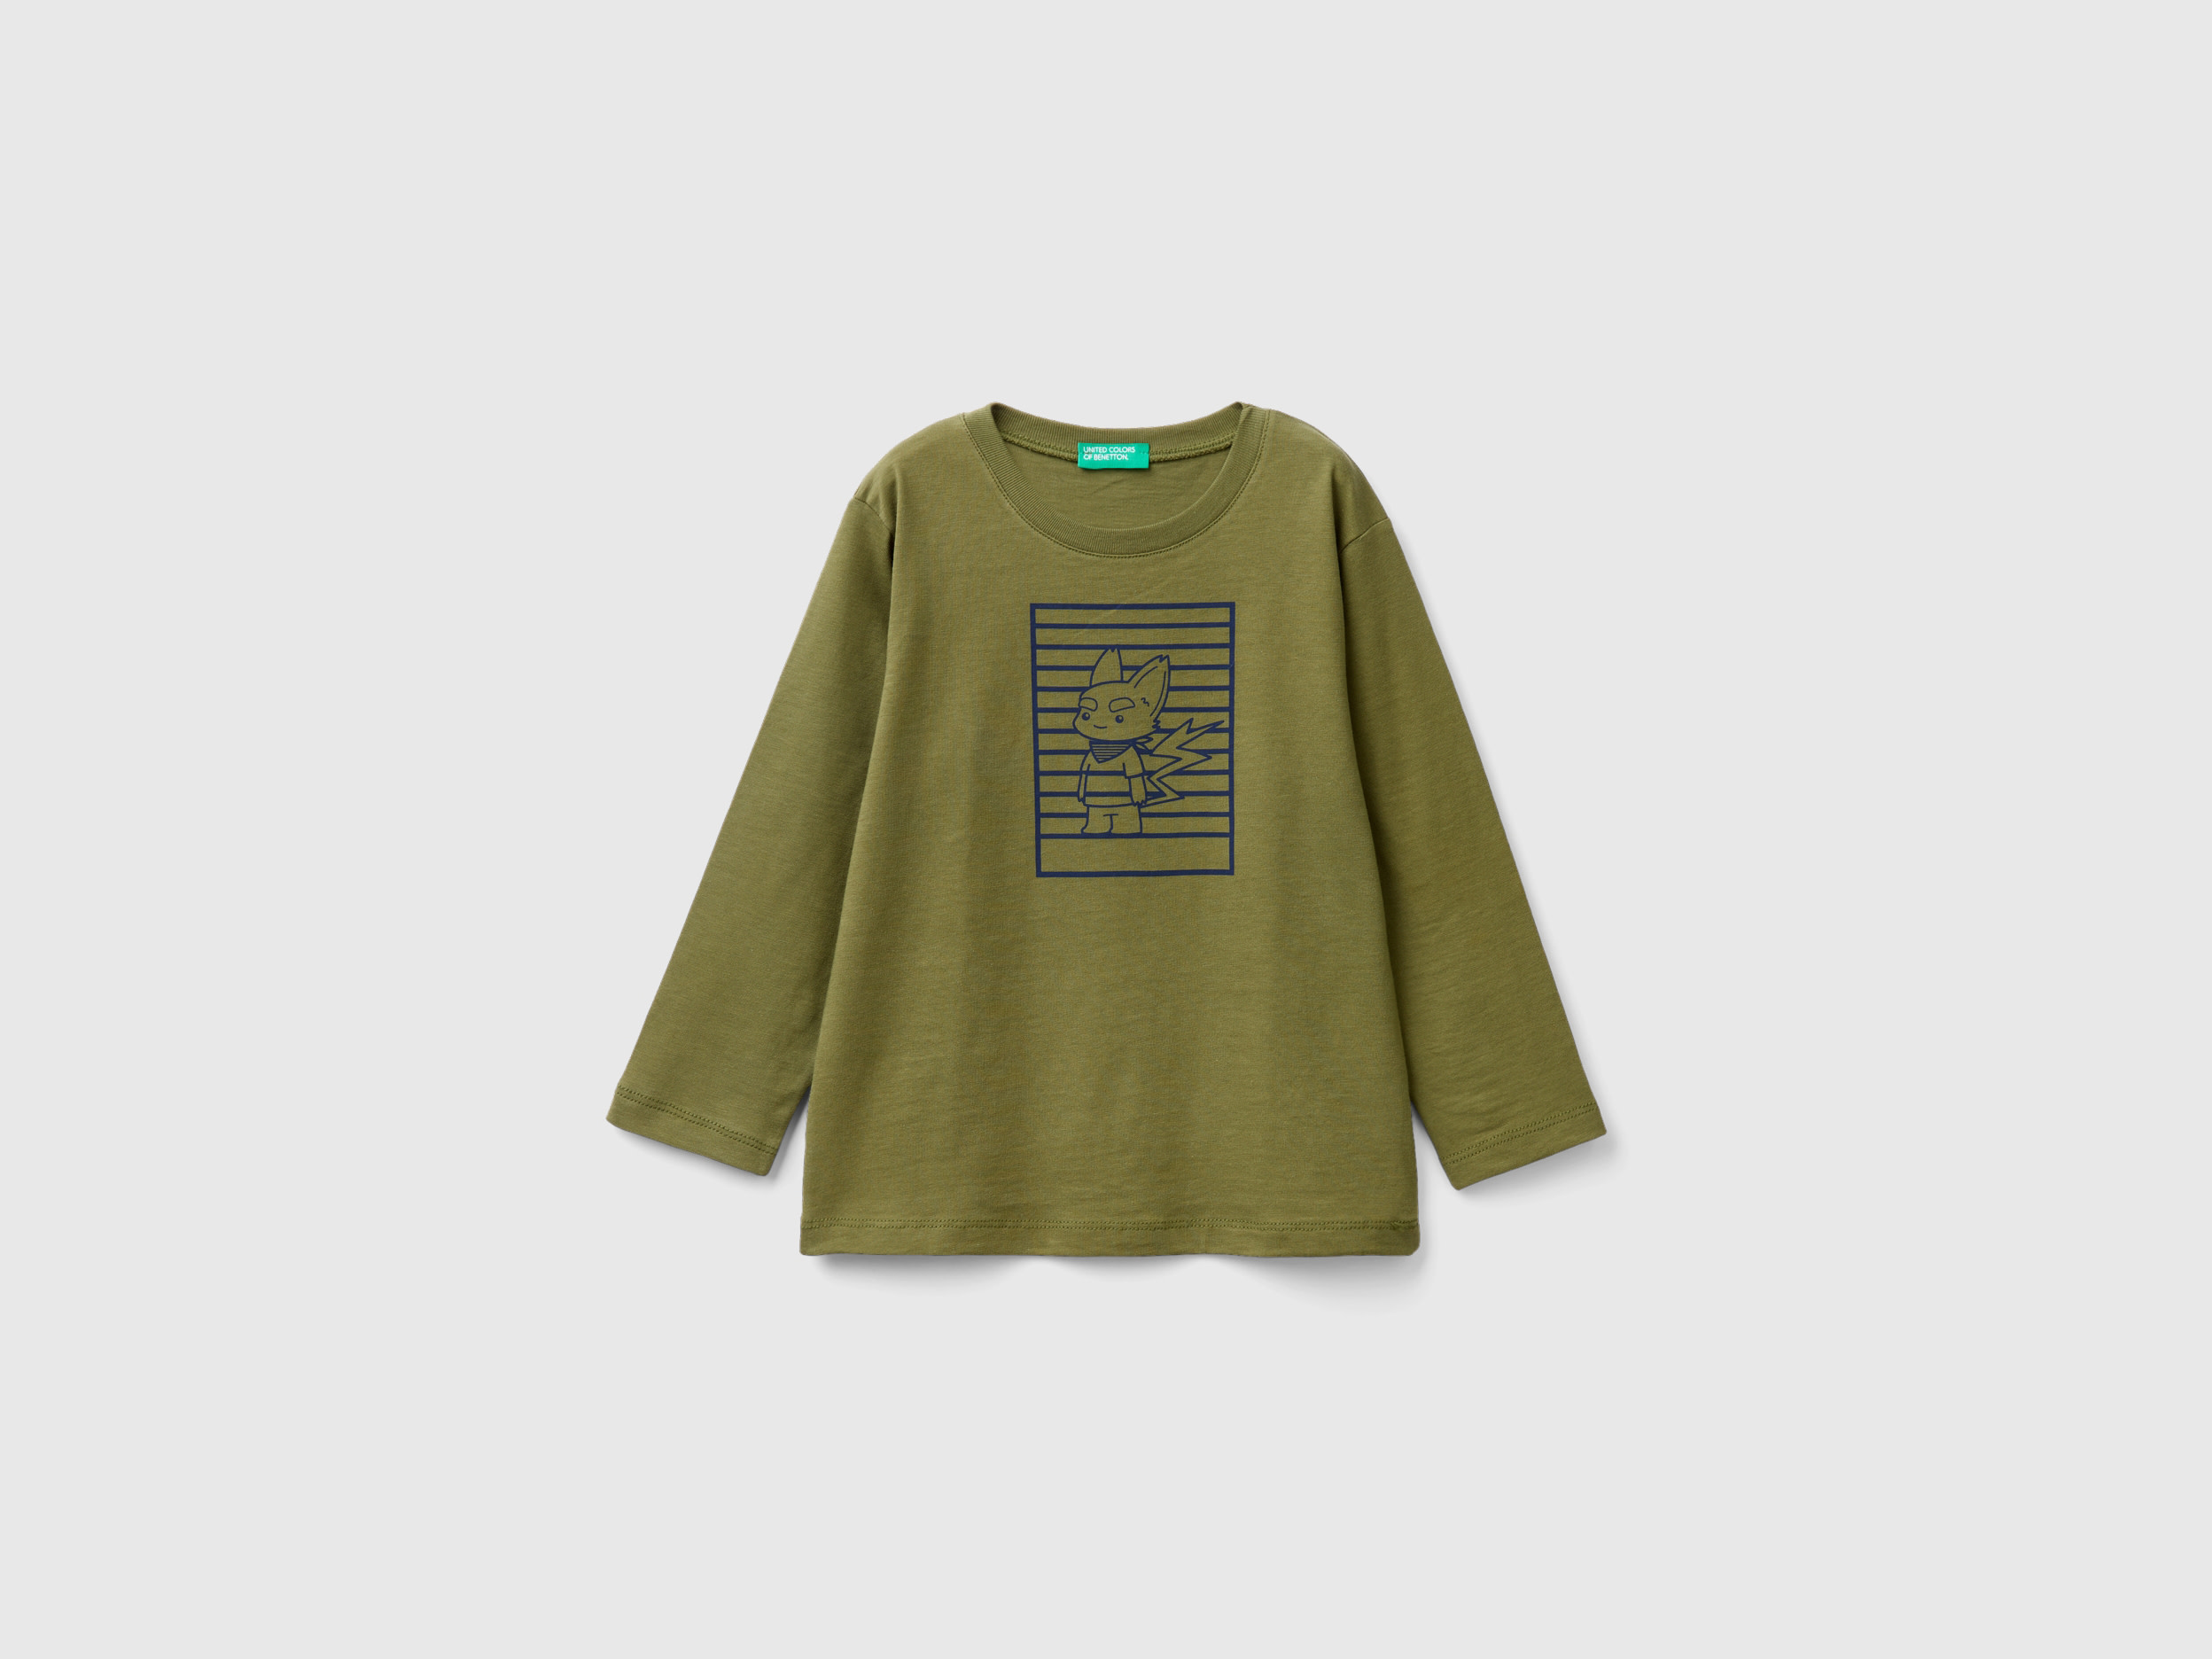 Benetton, Sweater In Cotton With Print, size 12-18, Military Green, Kids